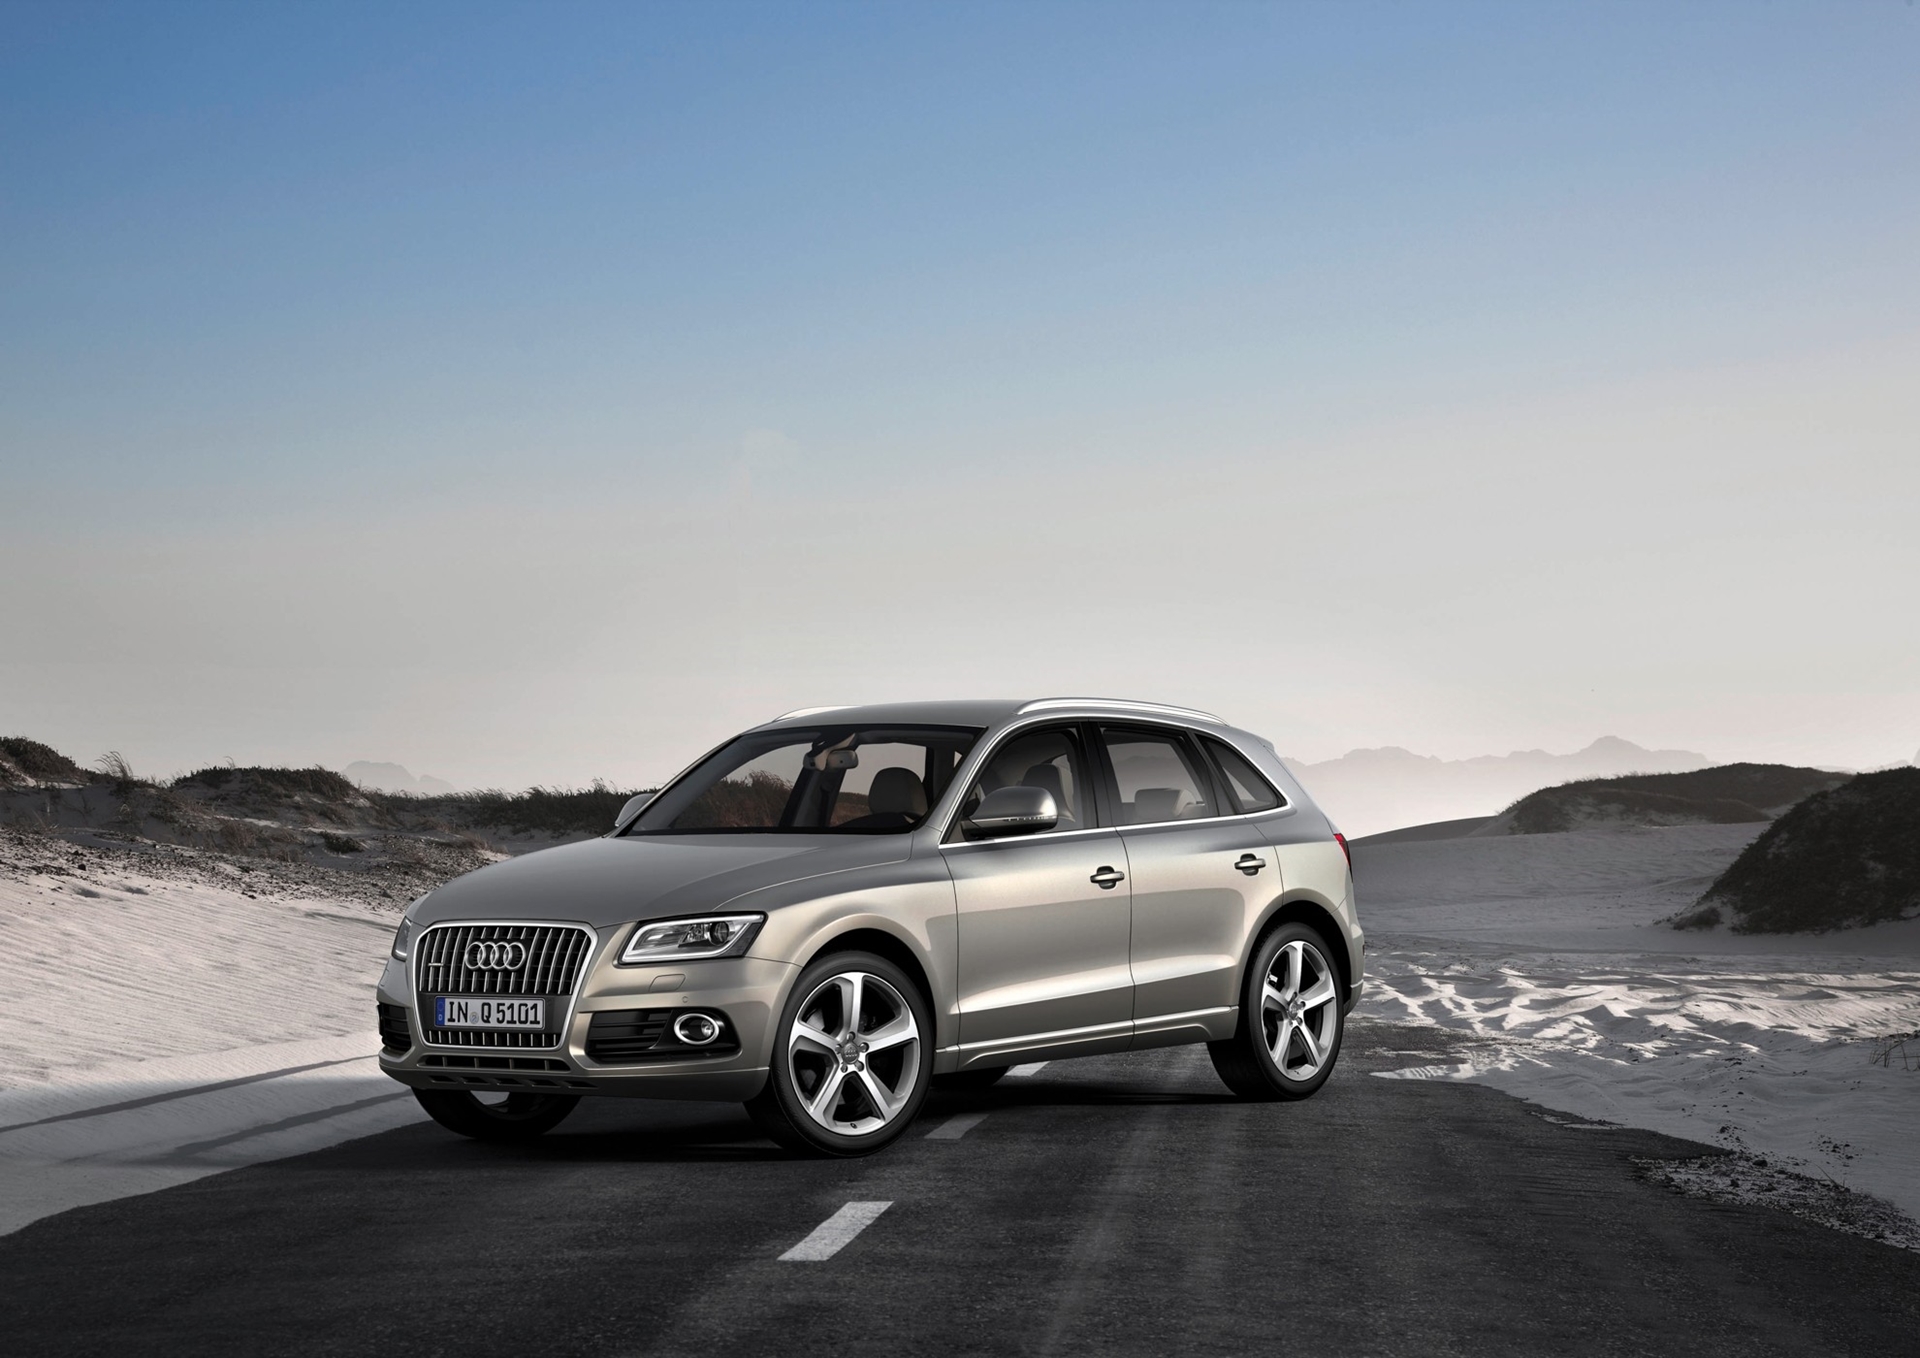 AUDI AG: prior-year sales total exceeded after 11 months